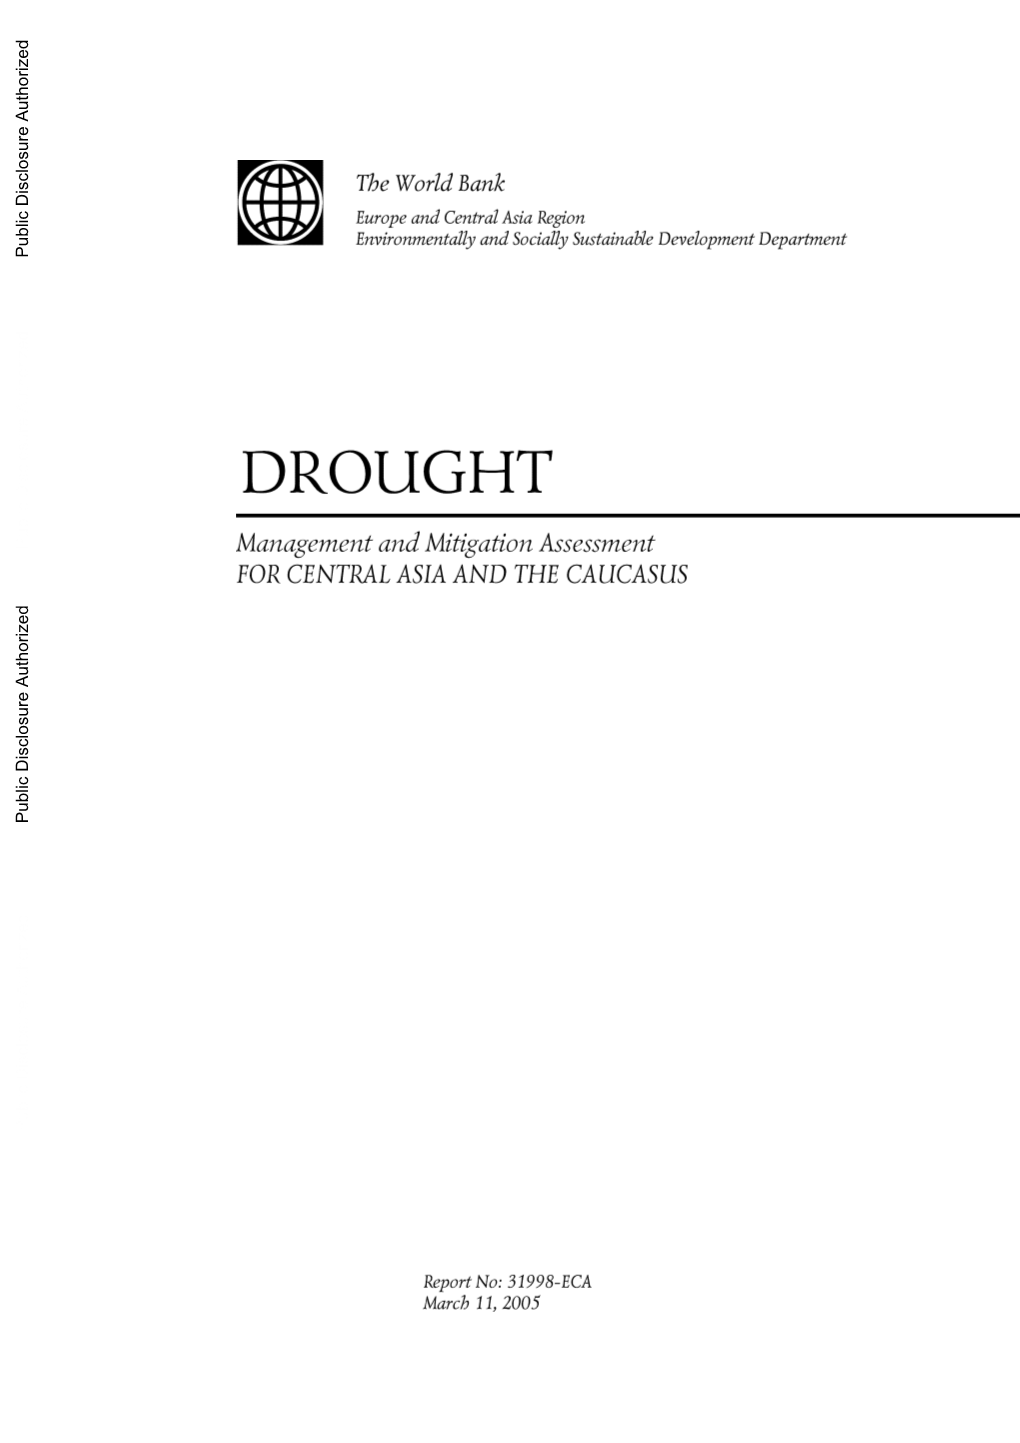 Drought Conditions and Impacts